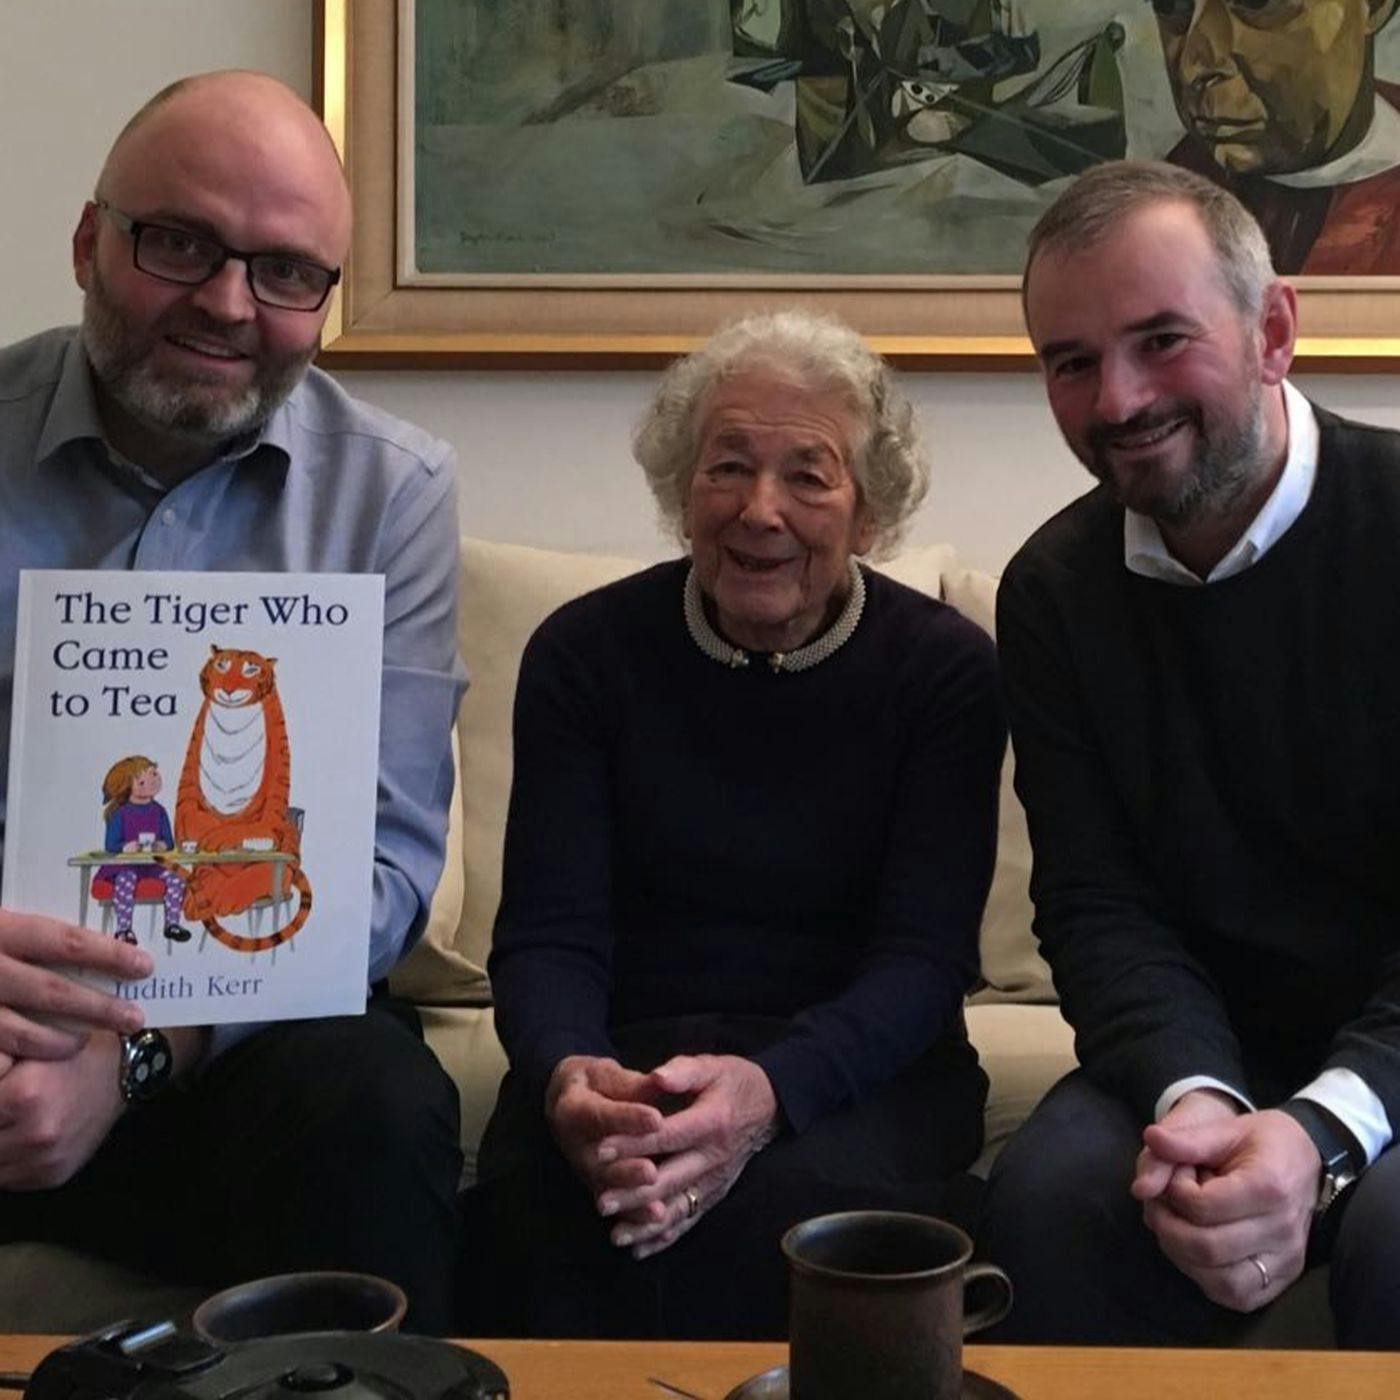 The Tiger Who Came to Tea author Judith Kerr on why today's children might not notice if he ever came back